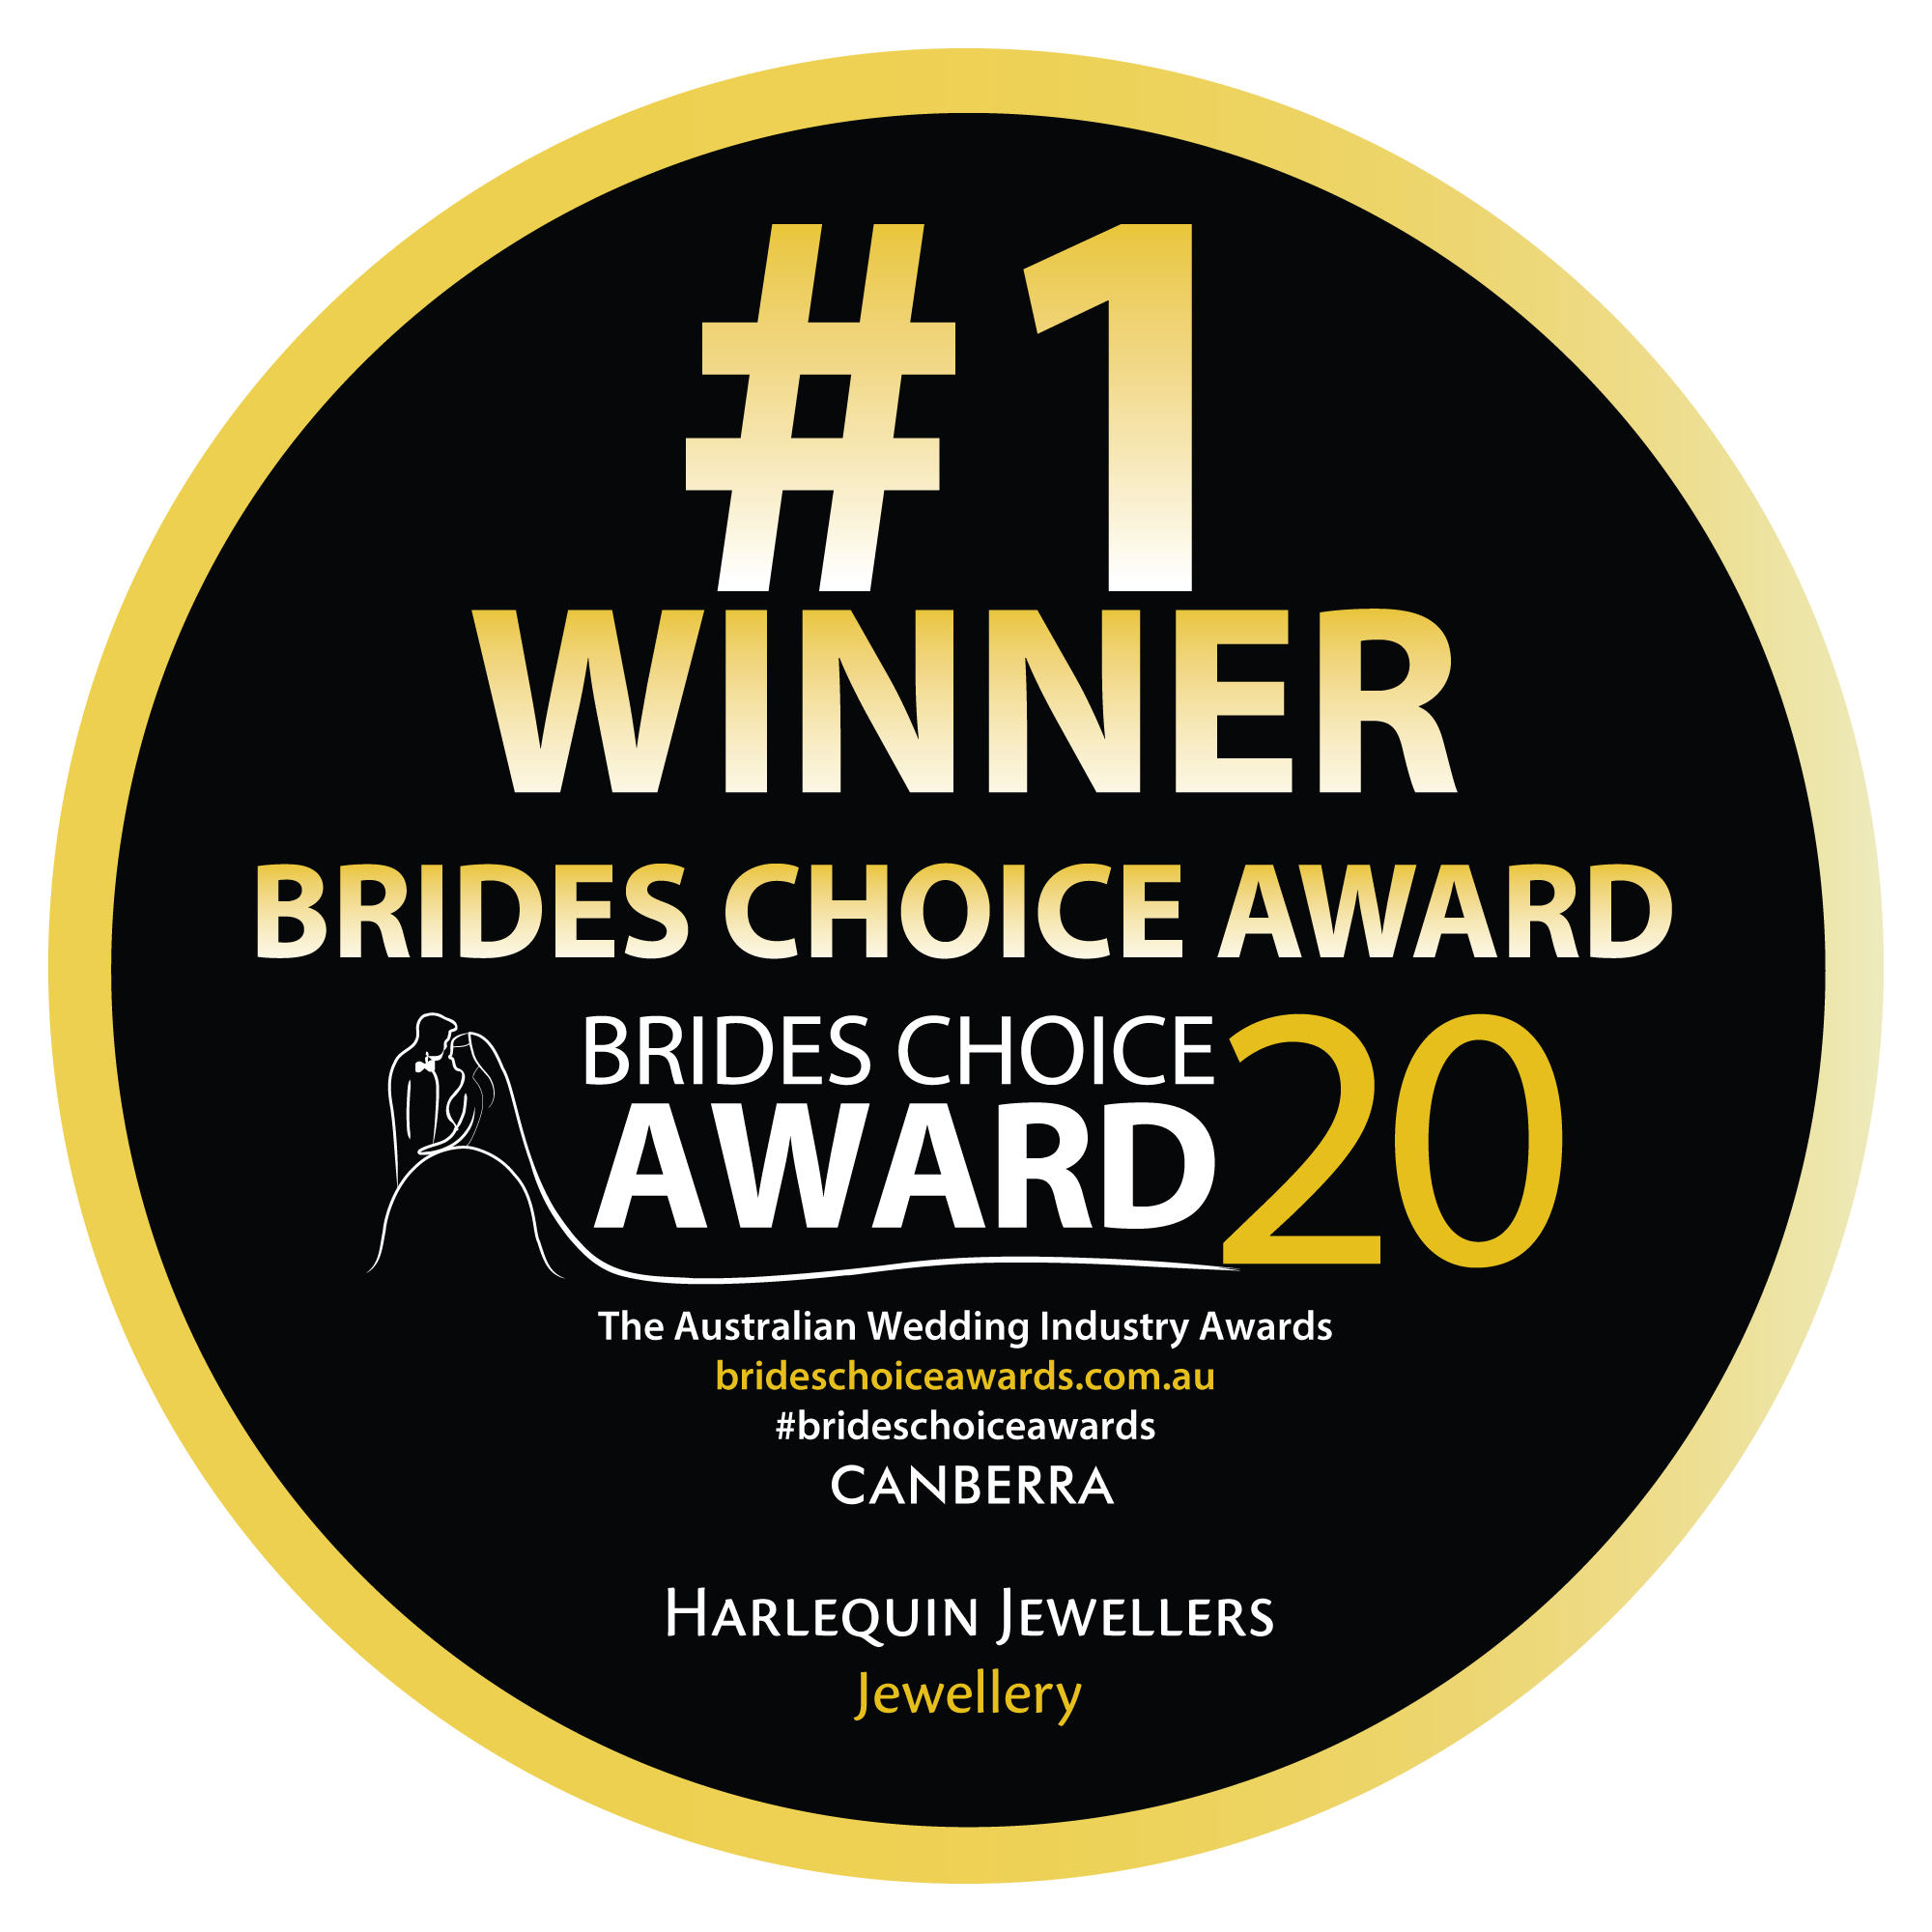 Canberra Brides Choice Awards jeweller category winner 2020 Harlequin Jewellers